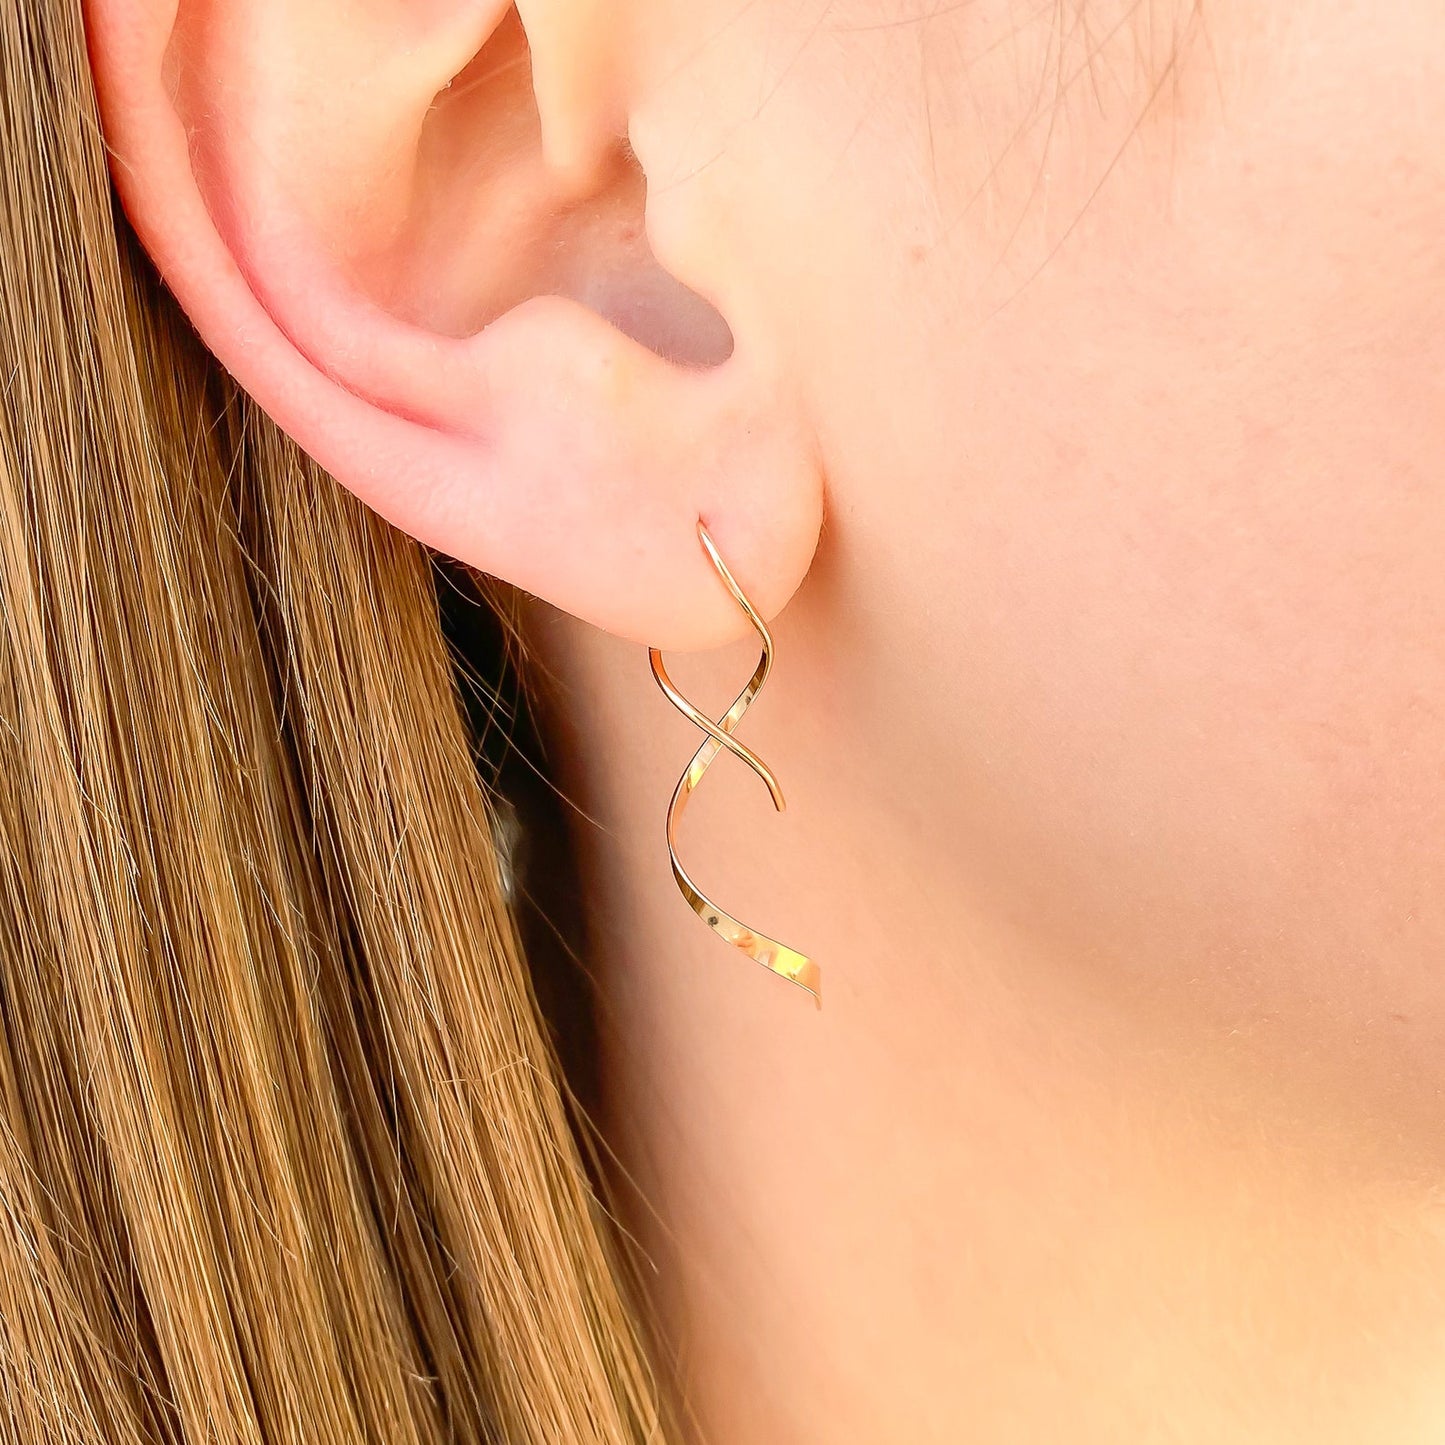 Solid 14K Gold Spiral Earrings